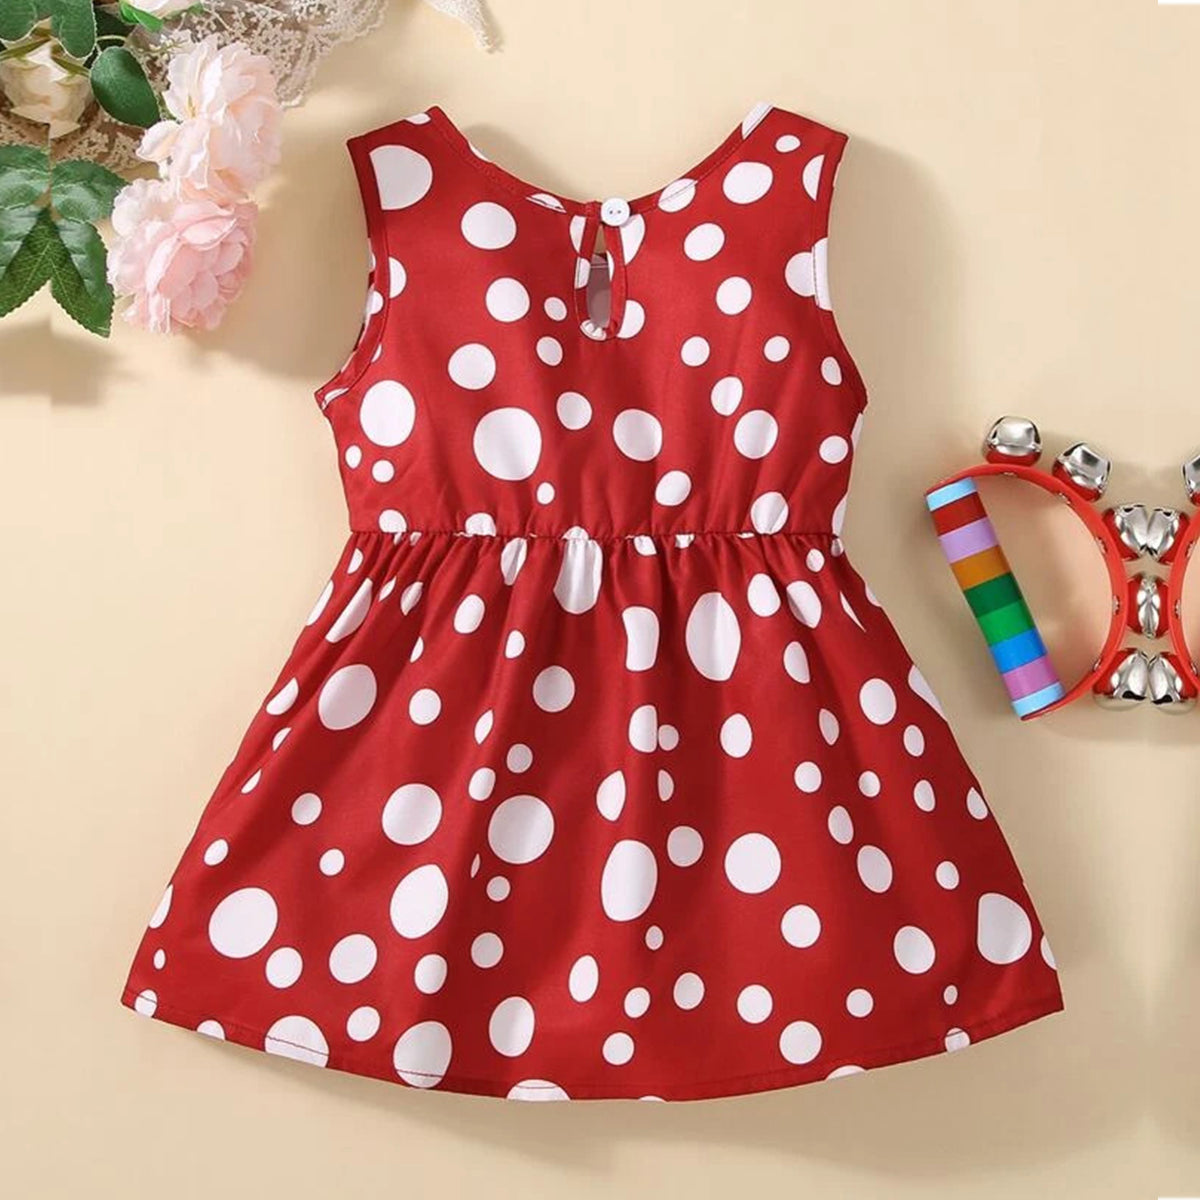 BabyGirl's Stylish Flamingo & Dot Red Ruffle Trim Frock Dresses_Frocks (Combo Pack Of 2)  for Baby Girl.